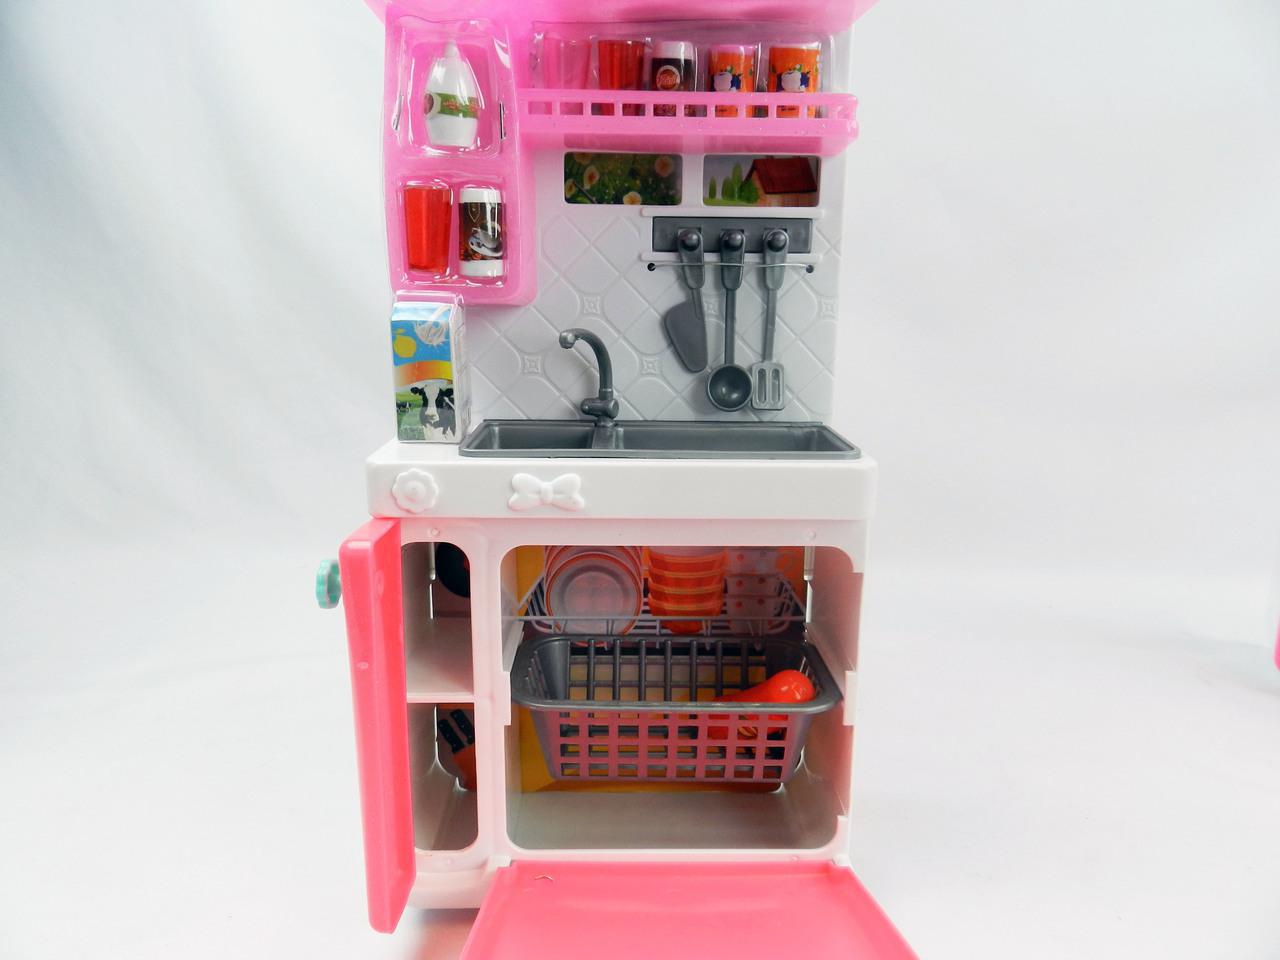 My Modern Kid's Mini Kitchen Toy Playset With Lights and Sounds - Feature: Stove, Kitchen Sink, and Refrigerator - Size 15" x 12.5"